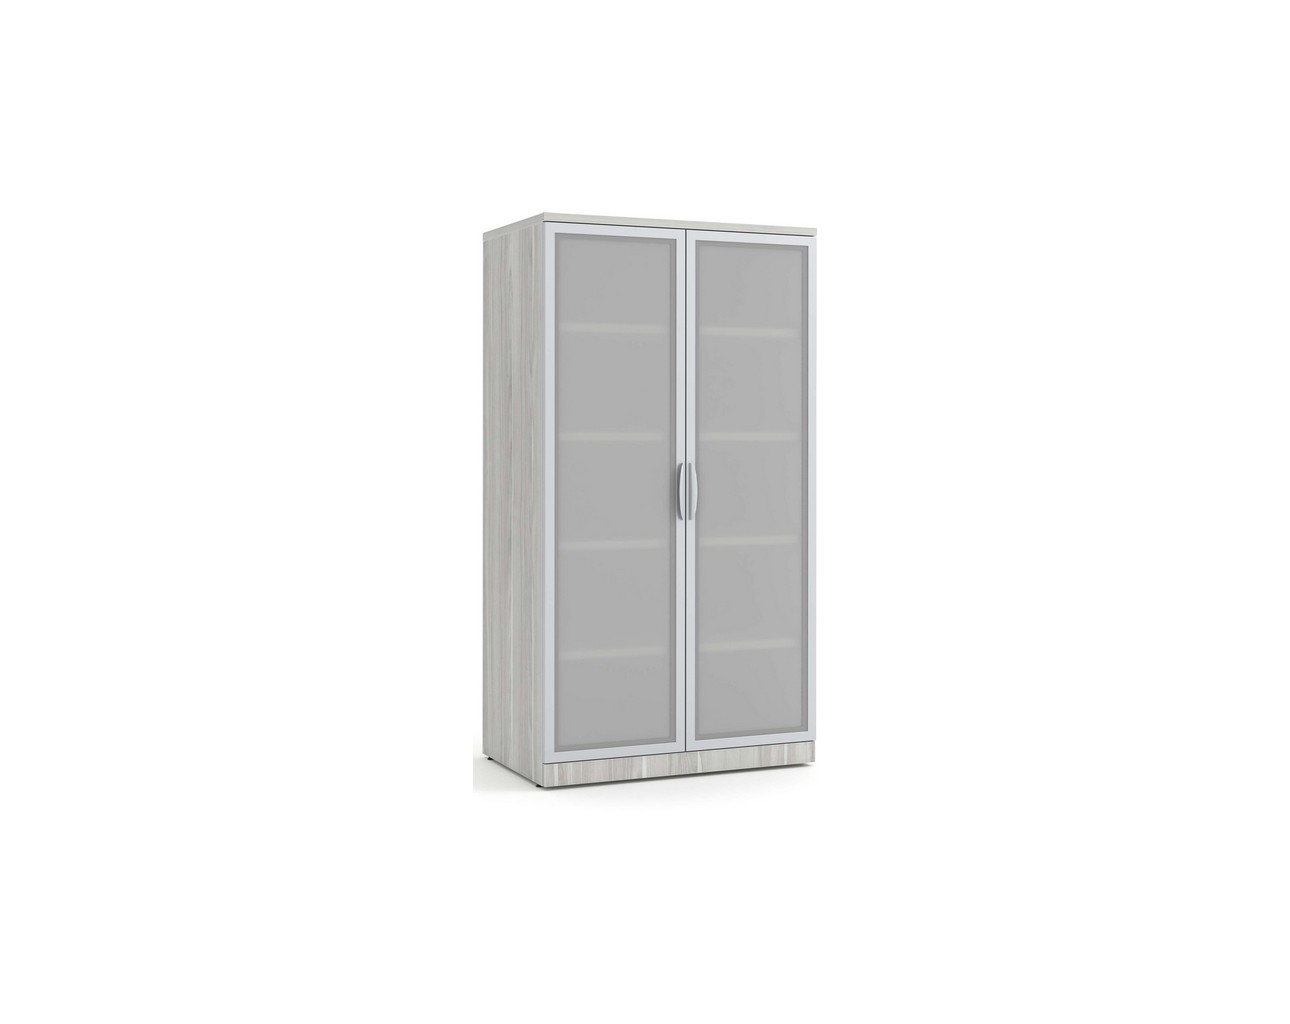 Glass Double Door Storage Cabinet 65 Inch with Silver Birch Finish